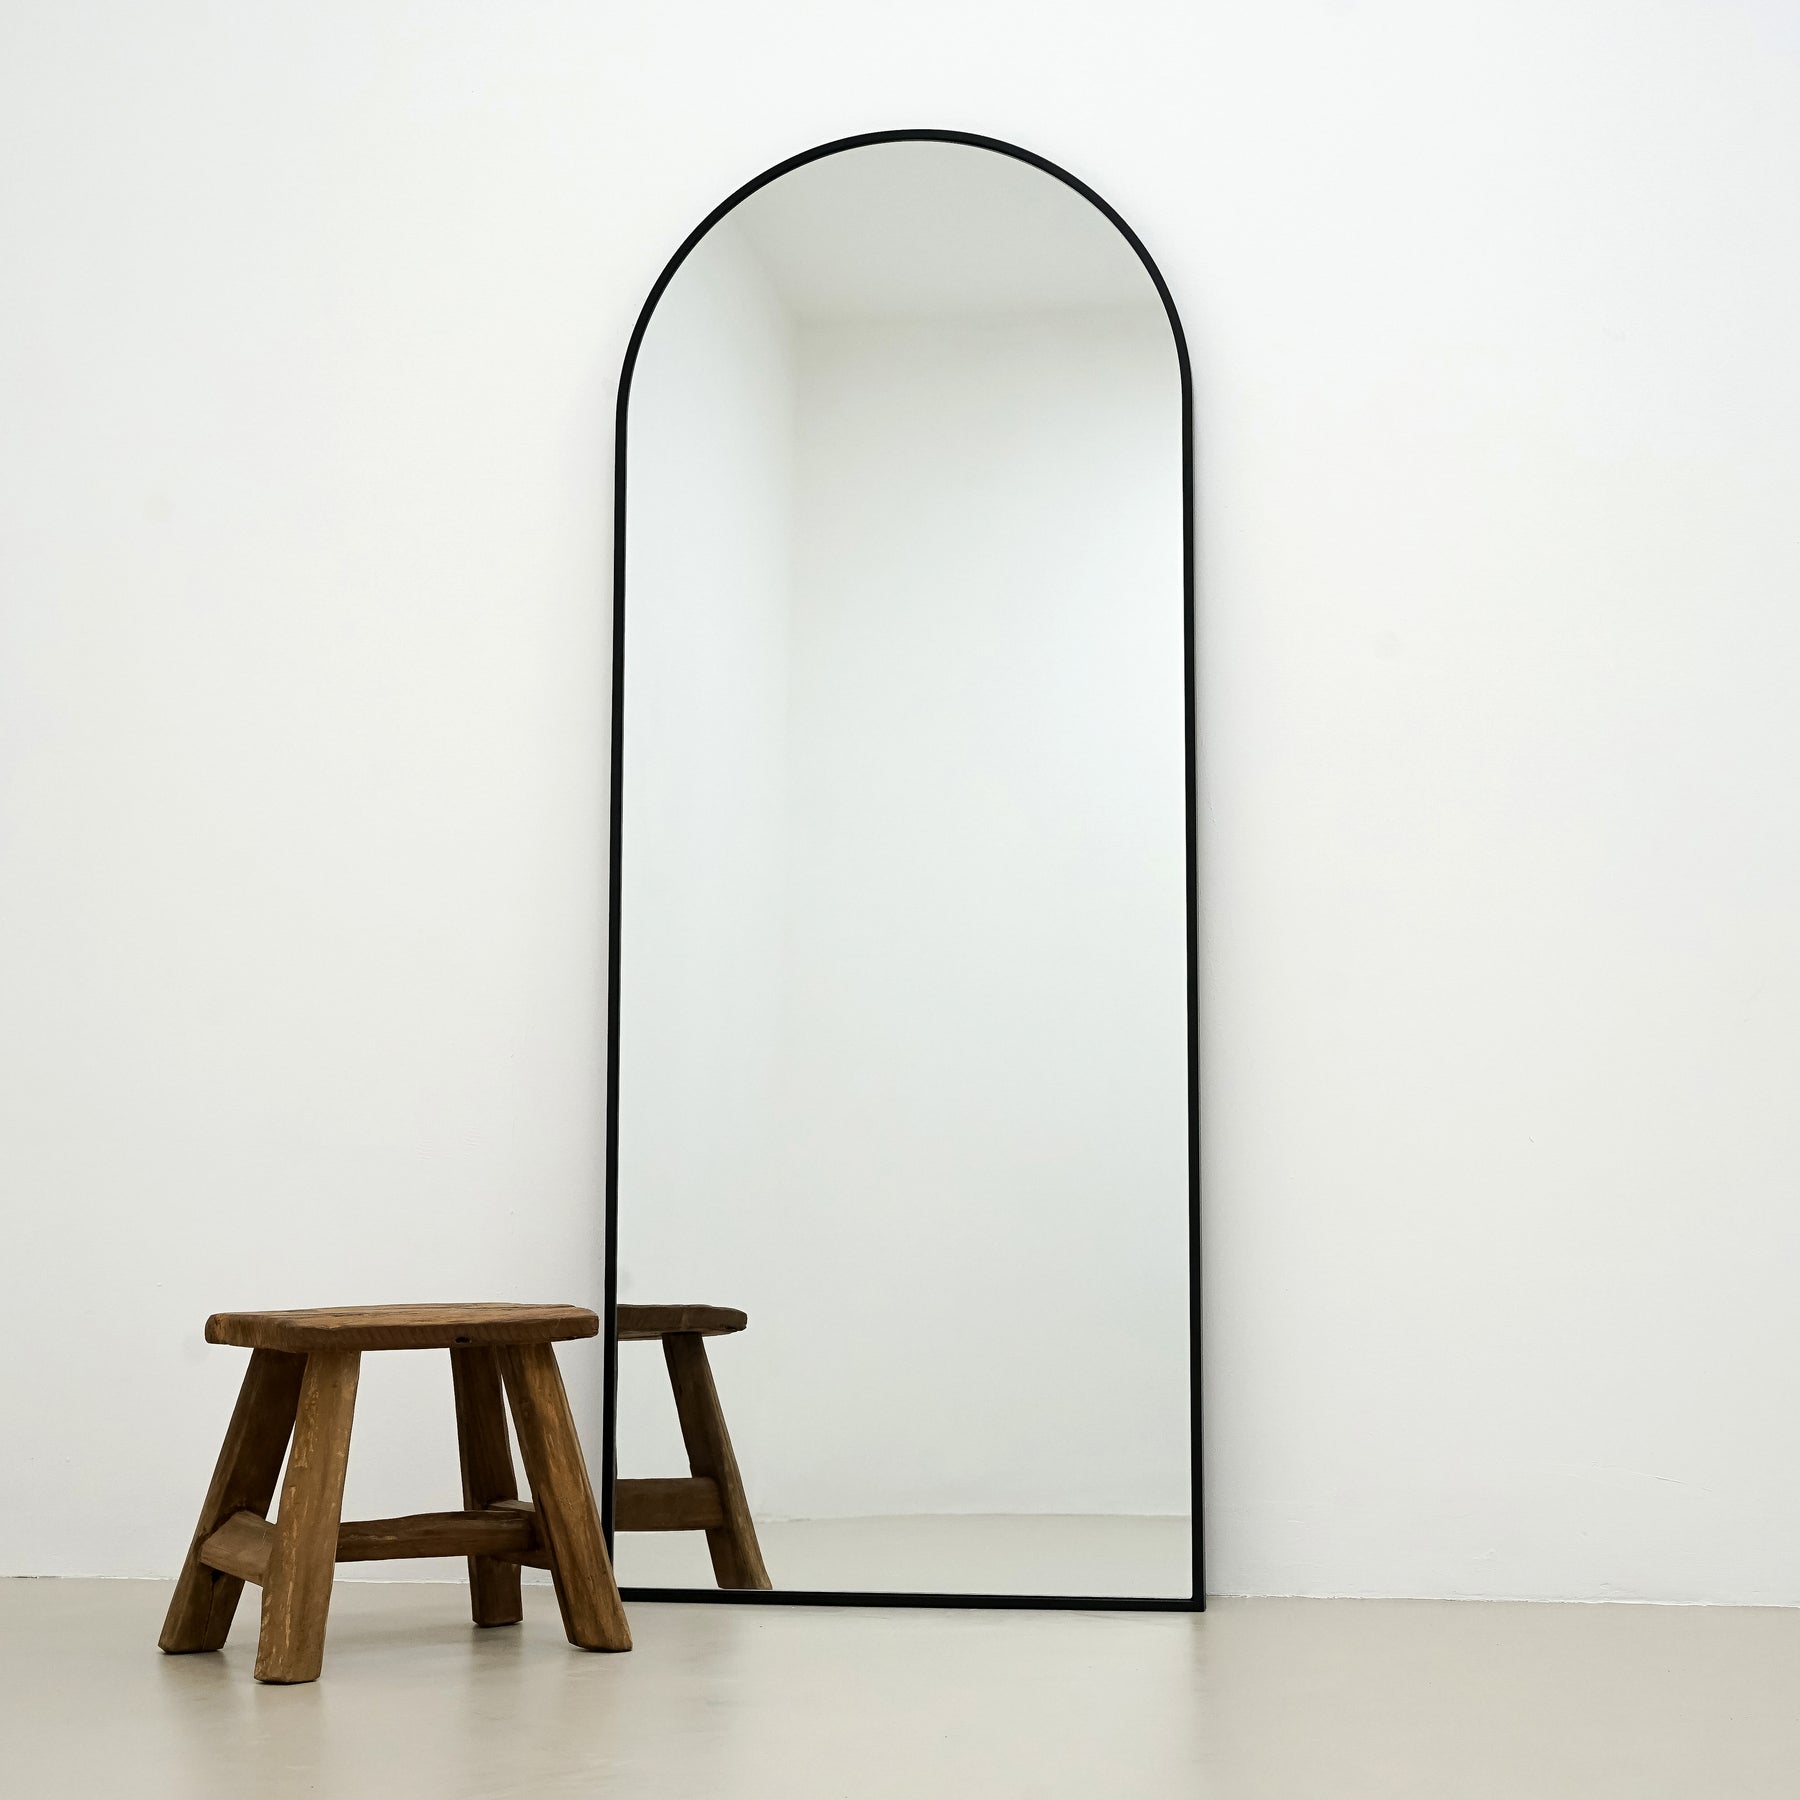 Champagne Full Length Arched Metal Mirror alternate shot beside wood stool